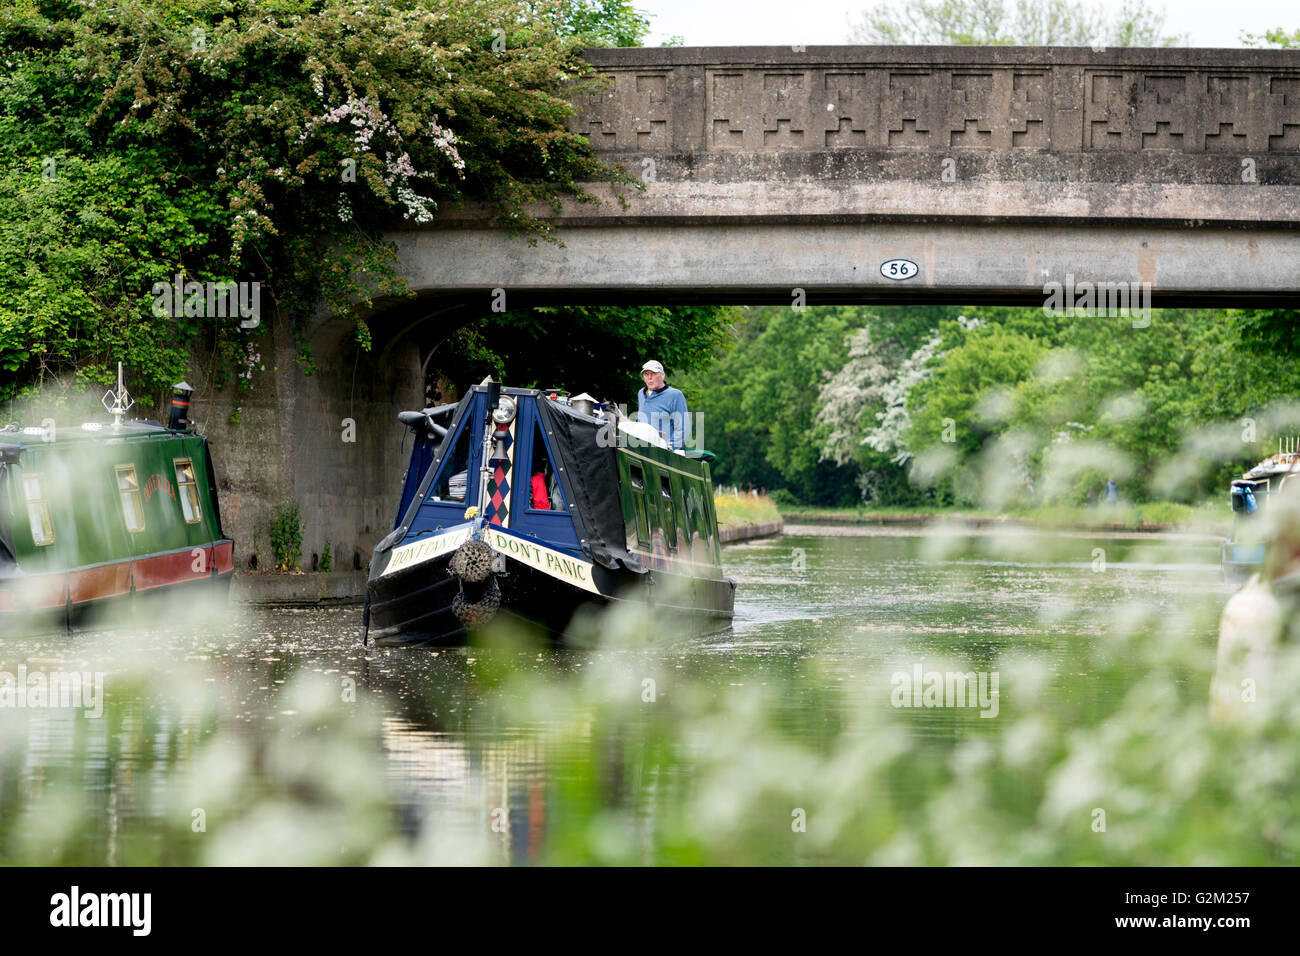 Narrowboat on the Grand Union Canal in spring, Warwickshire, UK Stock Photo